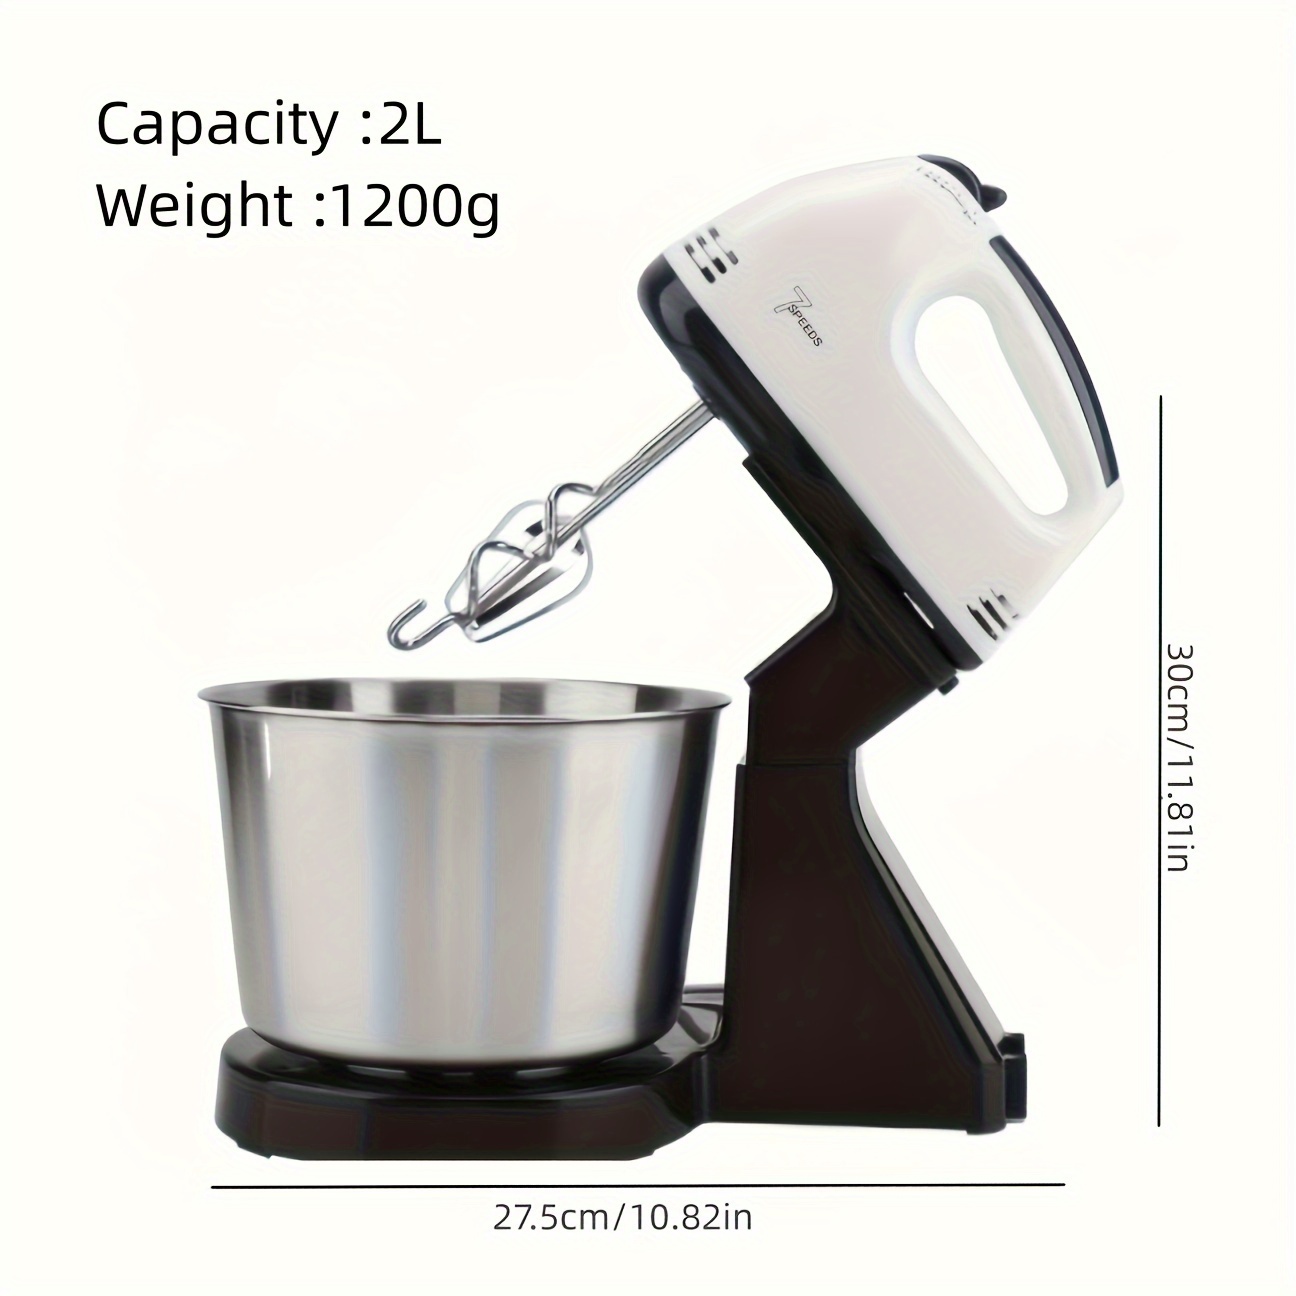 2-in-1 Stand & Hand Mixer